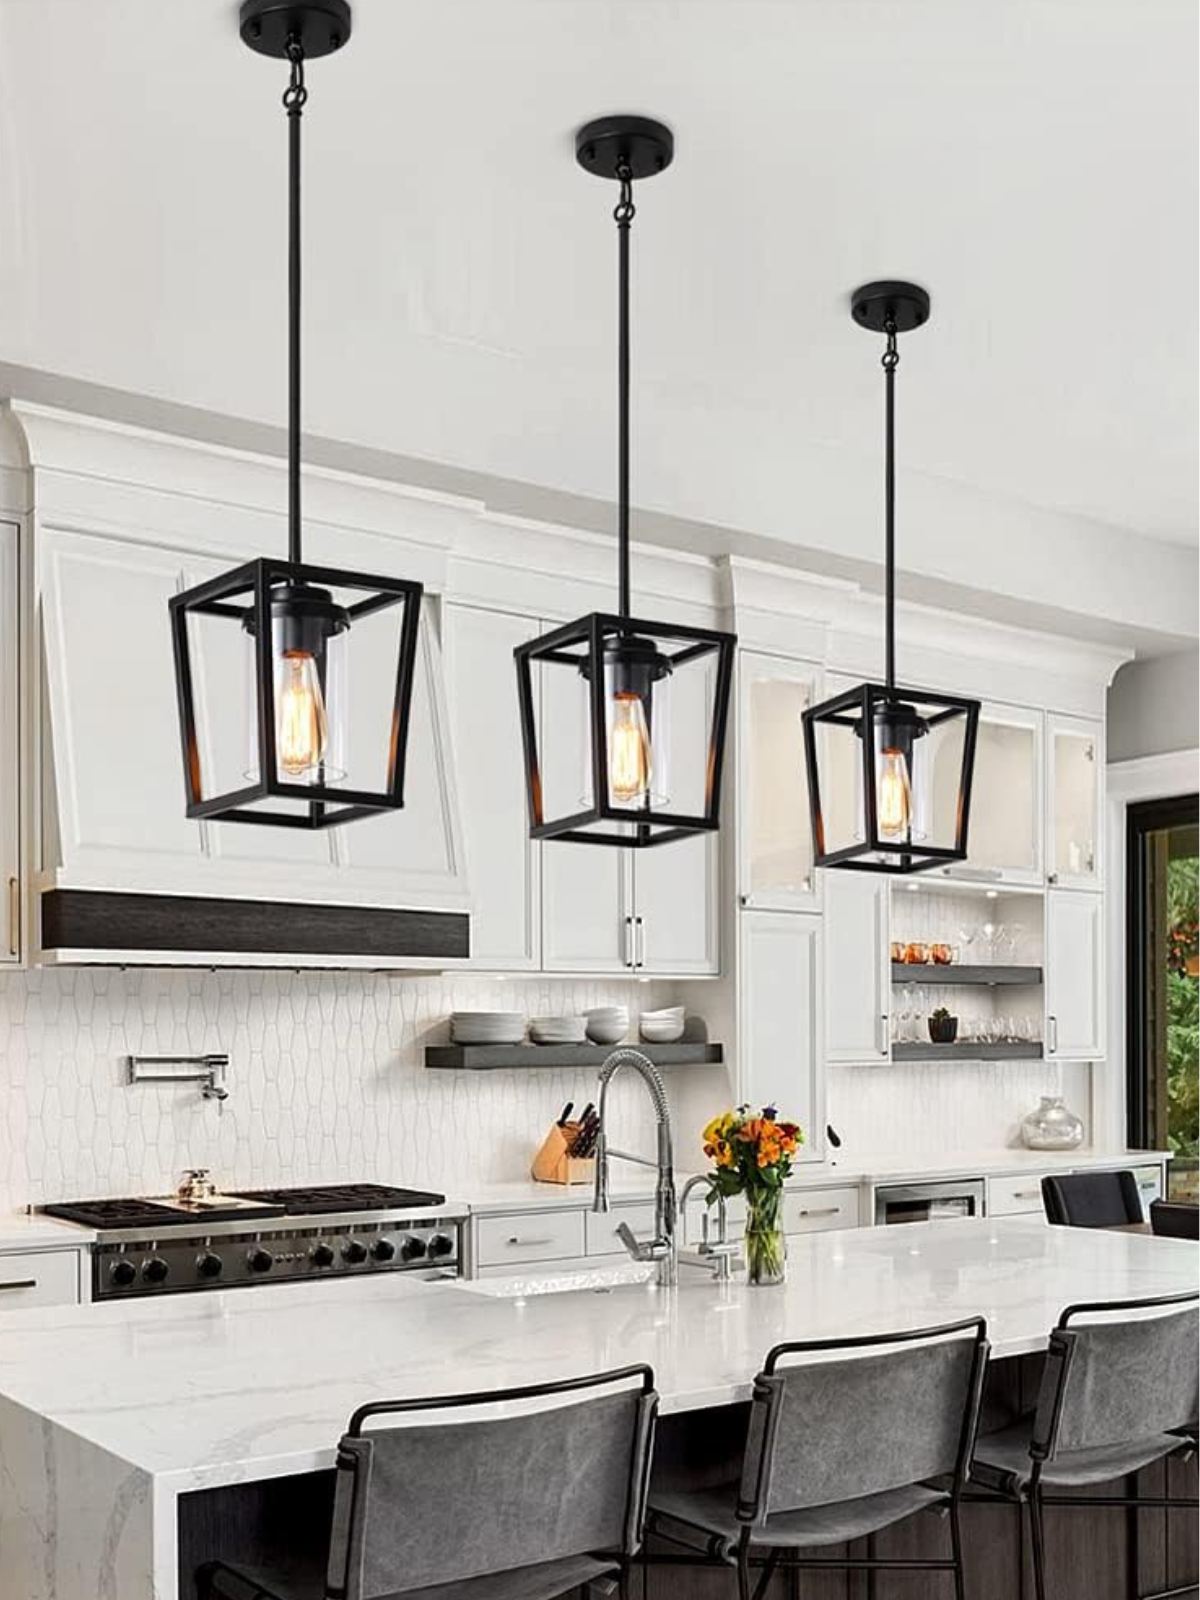 Black Pendant Light Farmhouse Chandeliers Modern Kitchen Island Light Fixtures Square Pendant Light Ceiling Hanging Dinning Room Light Over Sink with Sturdy Glass Shade